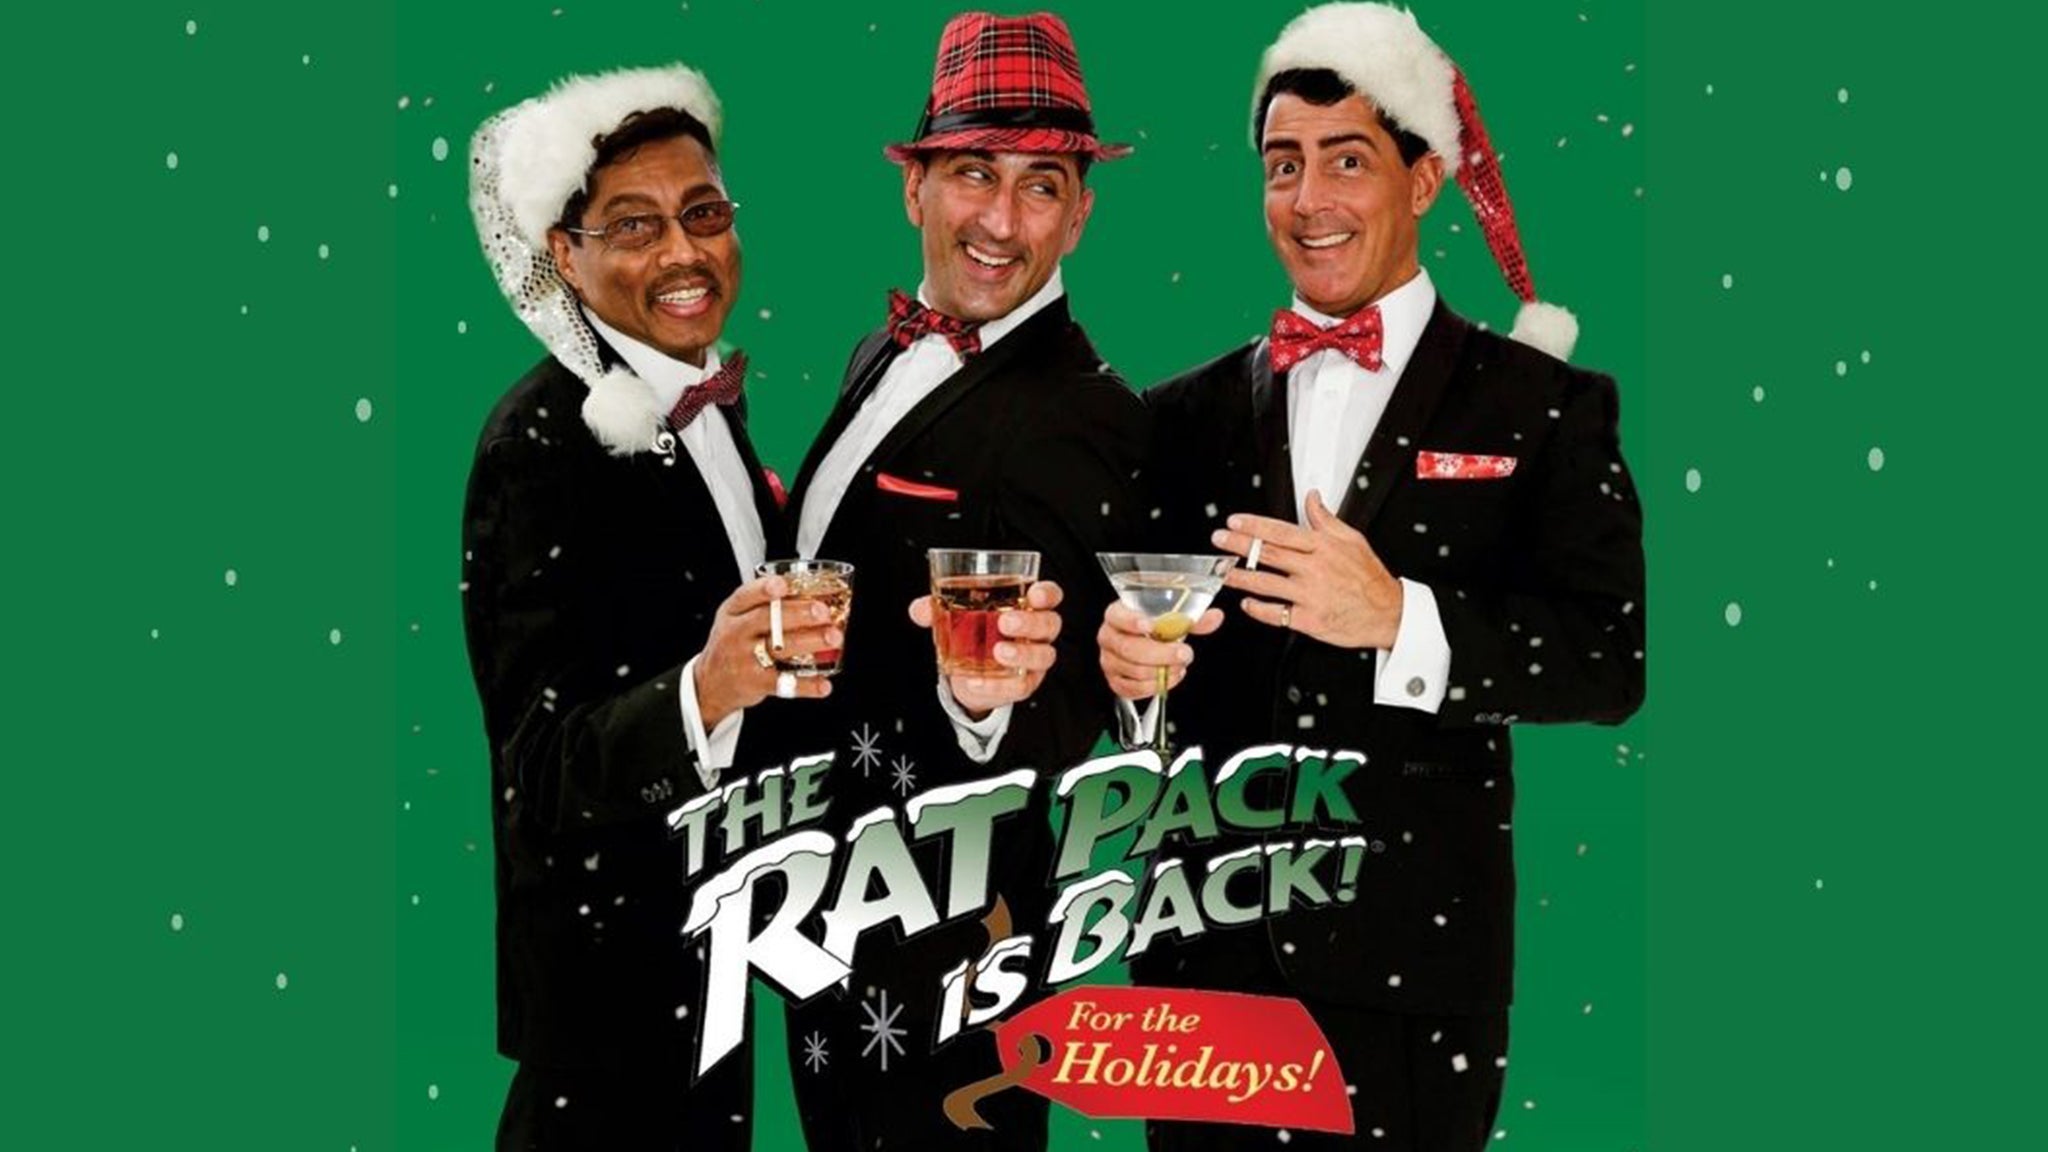 The Rat Pack is Back for The Holidays! presales in Elkhart